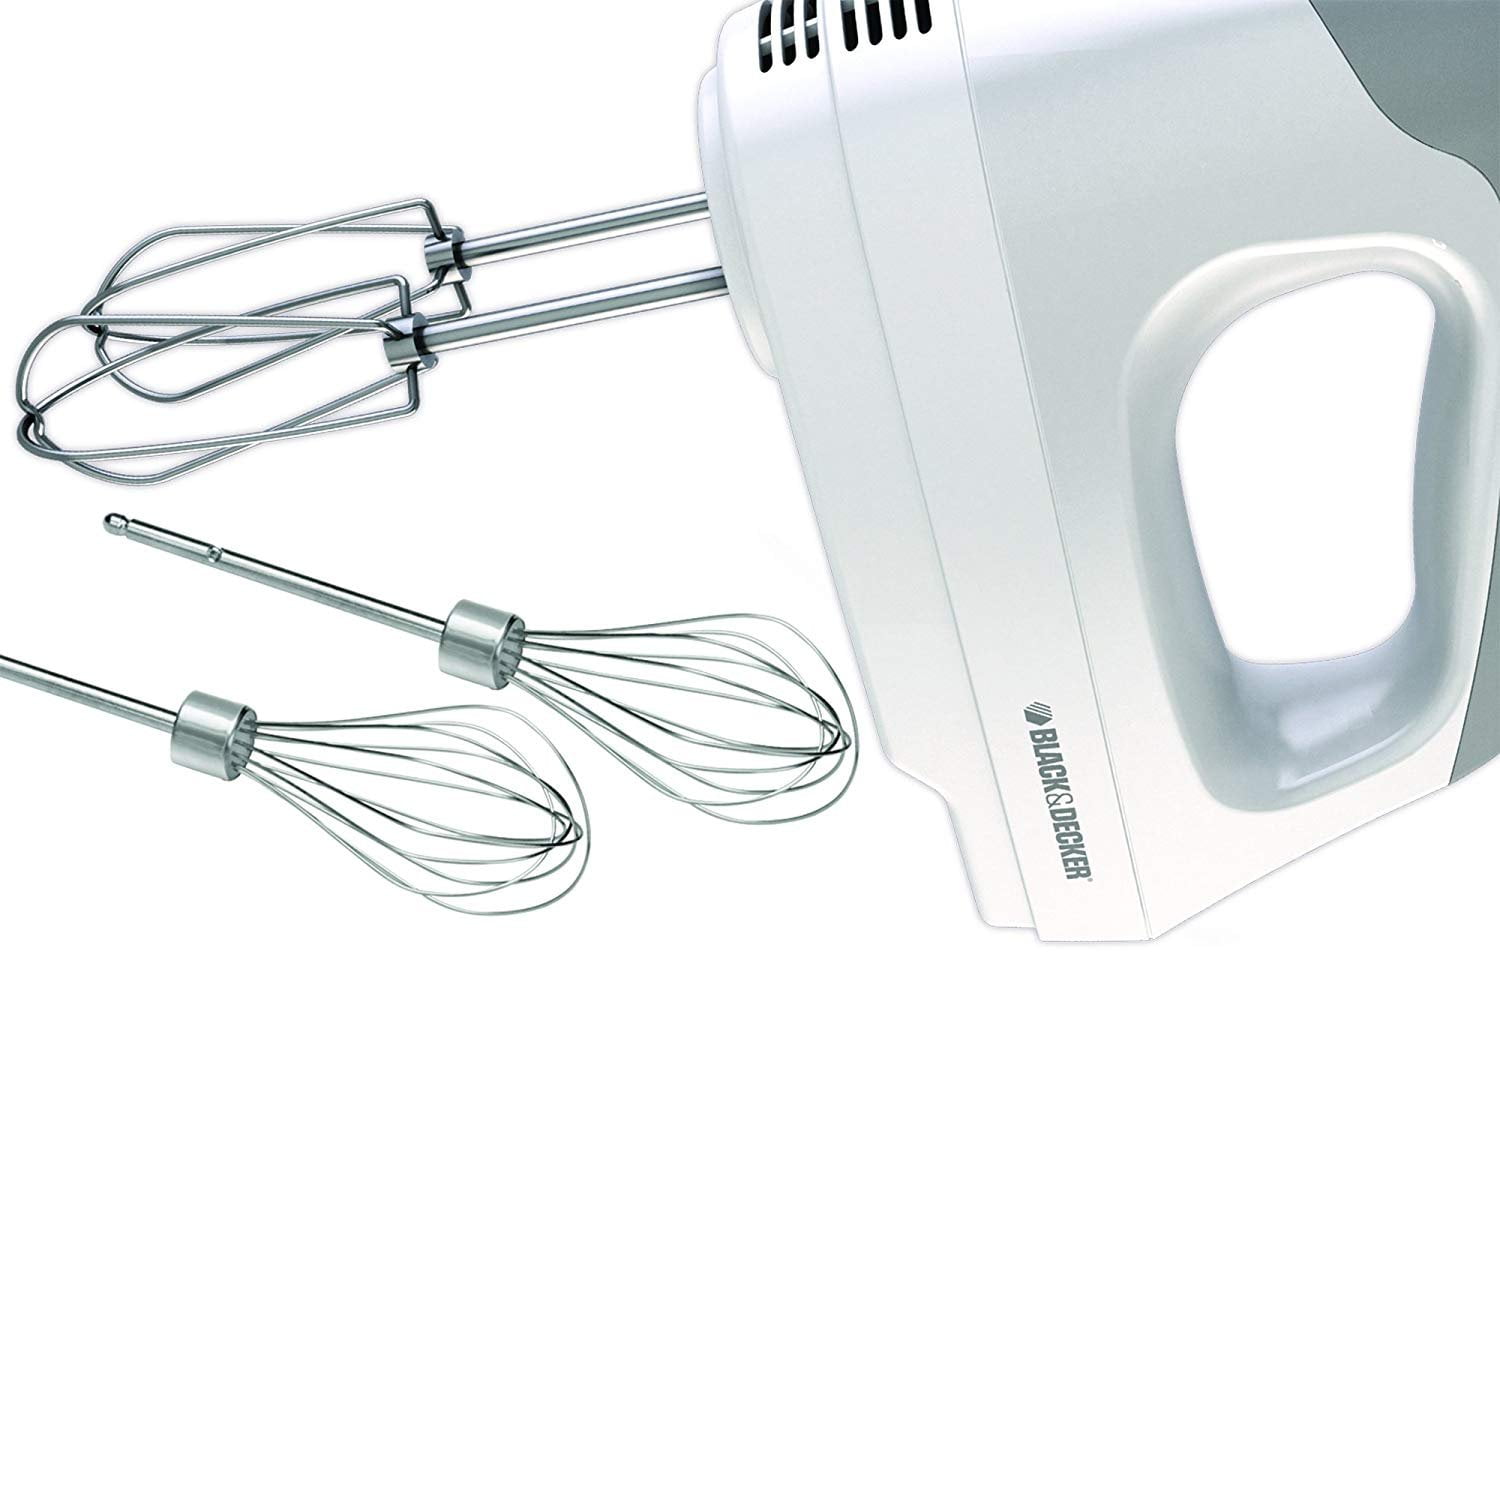 Black & Decker MX3500 6 Speed Hand Mixer with Beaters Great Condition!